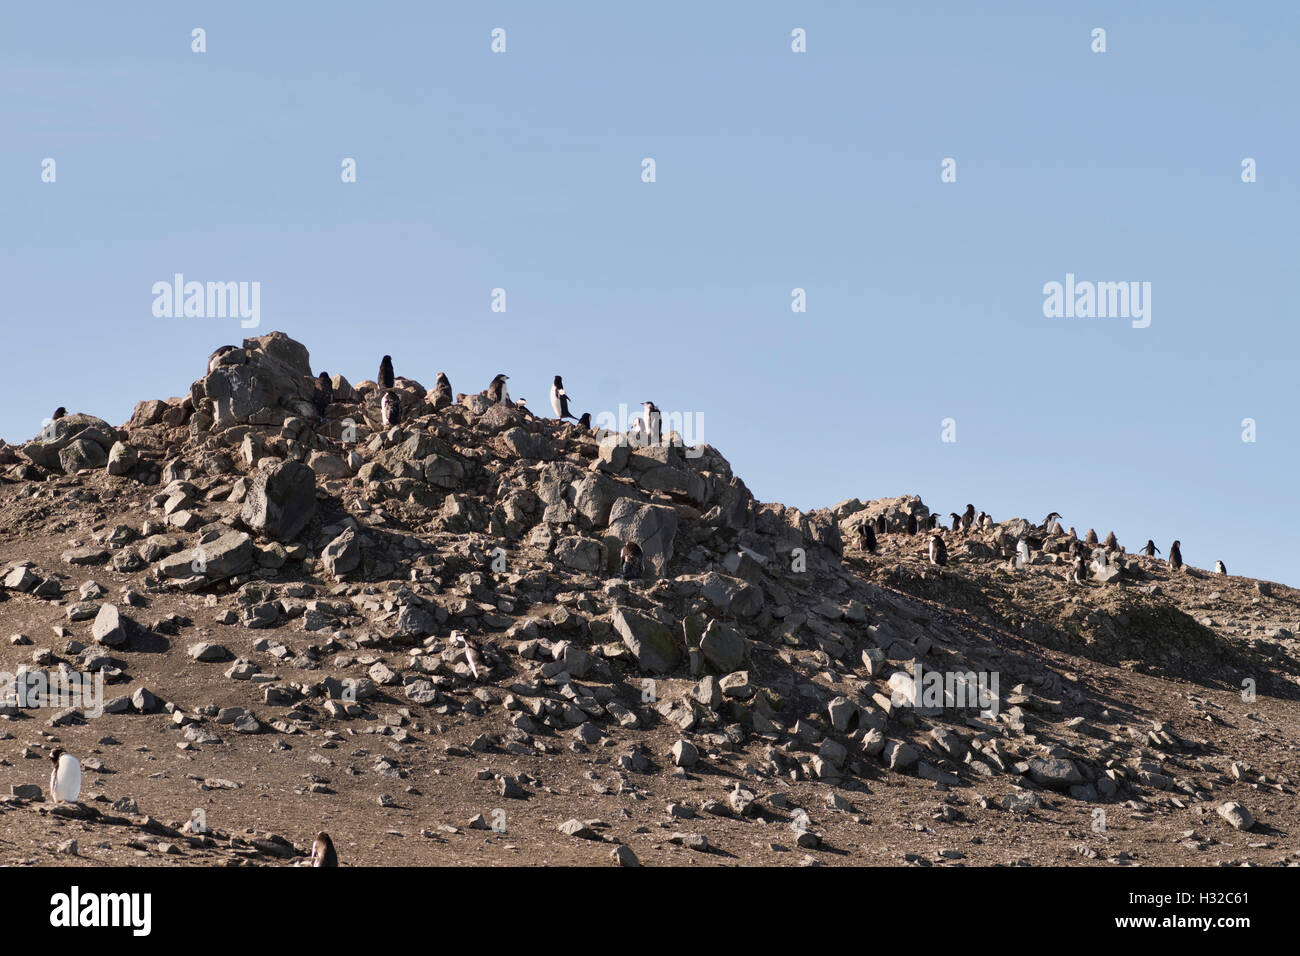 A chinstrap penguin rookery on one of the Aitcho islands. Stock Photo